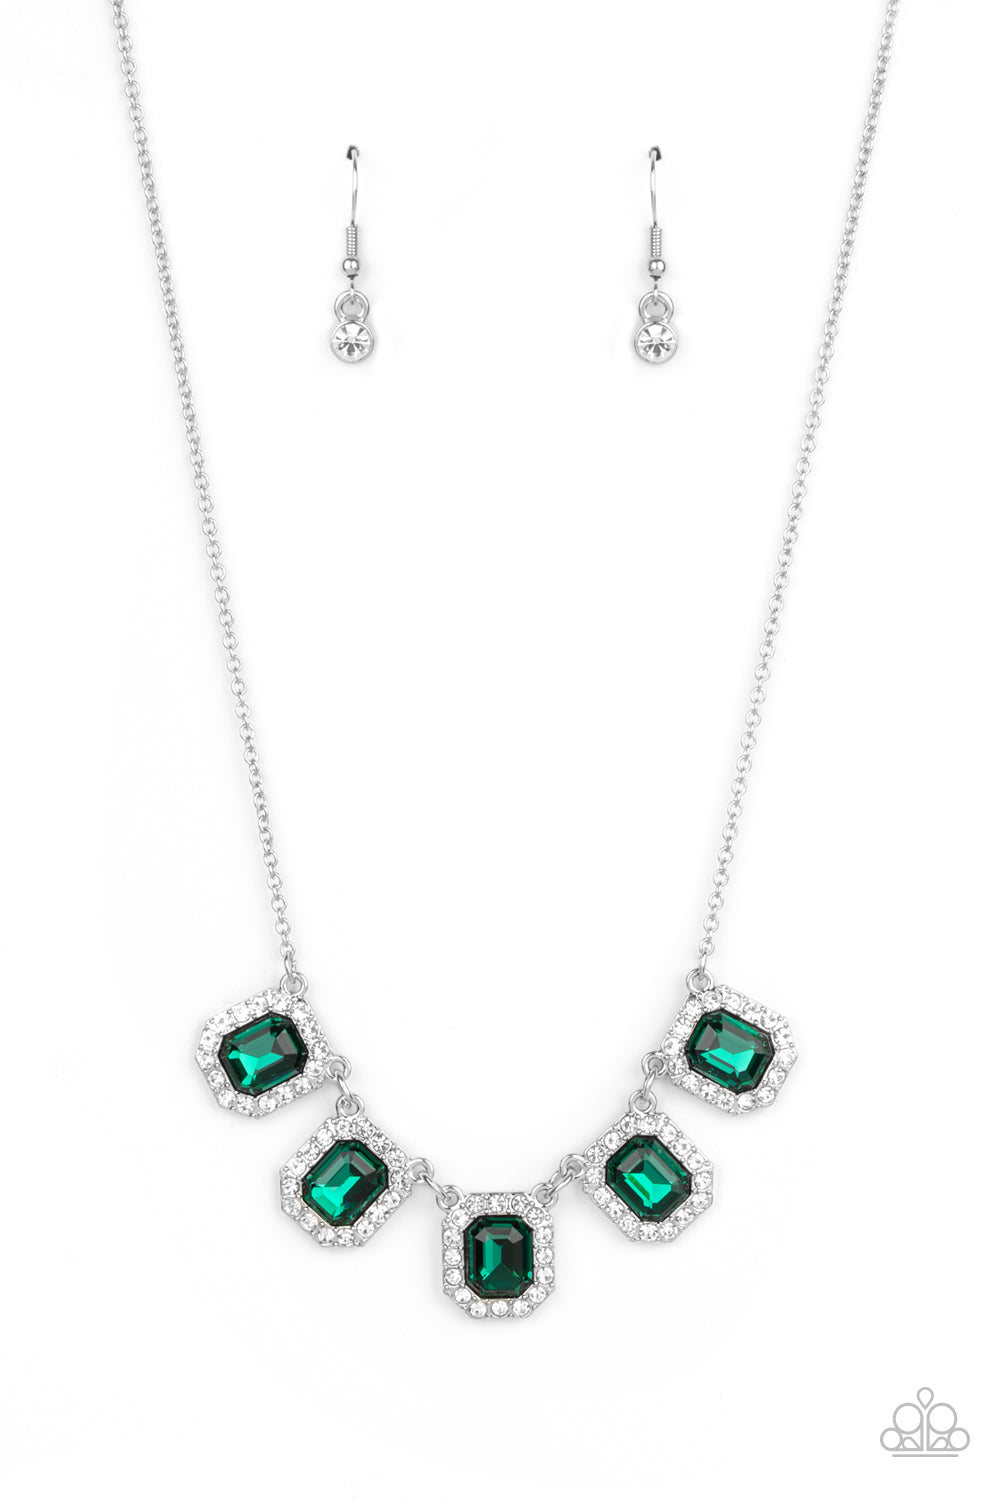 Paparazzi Next Level Luster - Green Necklace - A Finishing Touch Jewelry